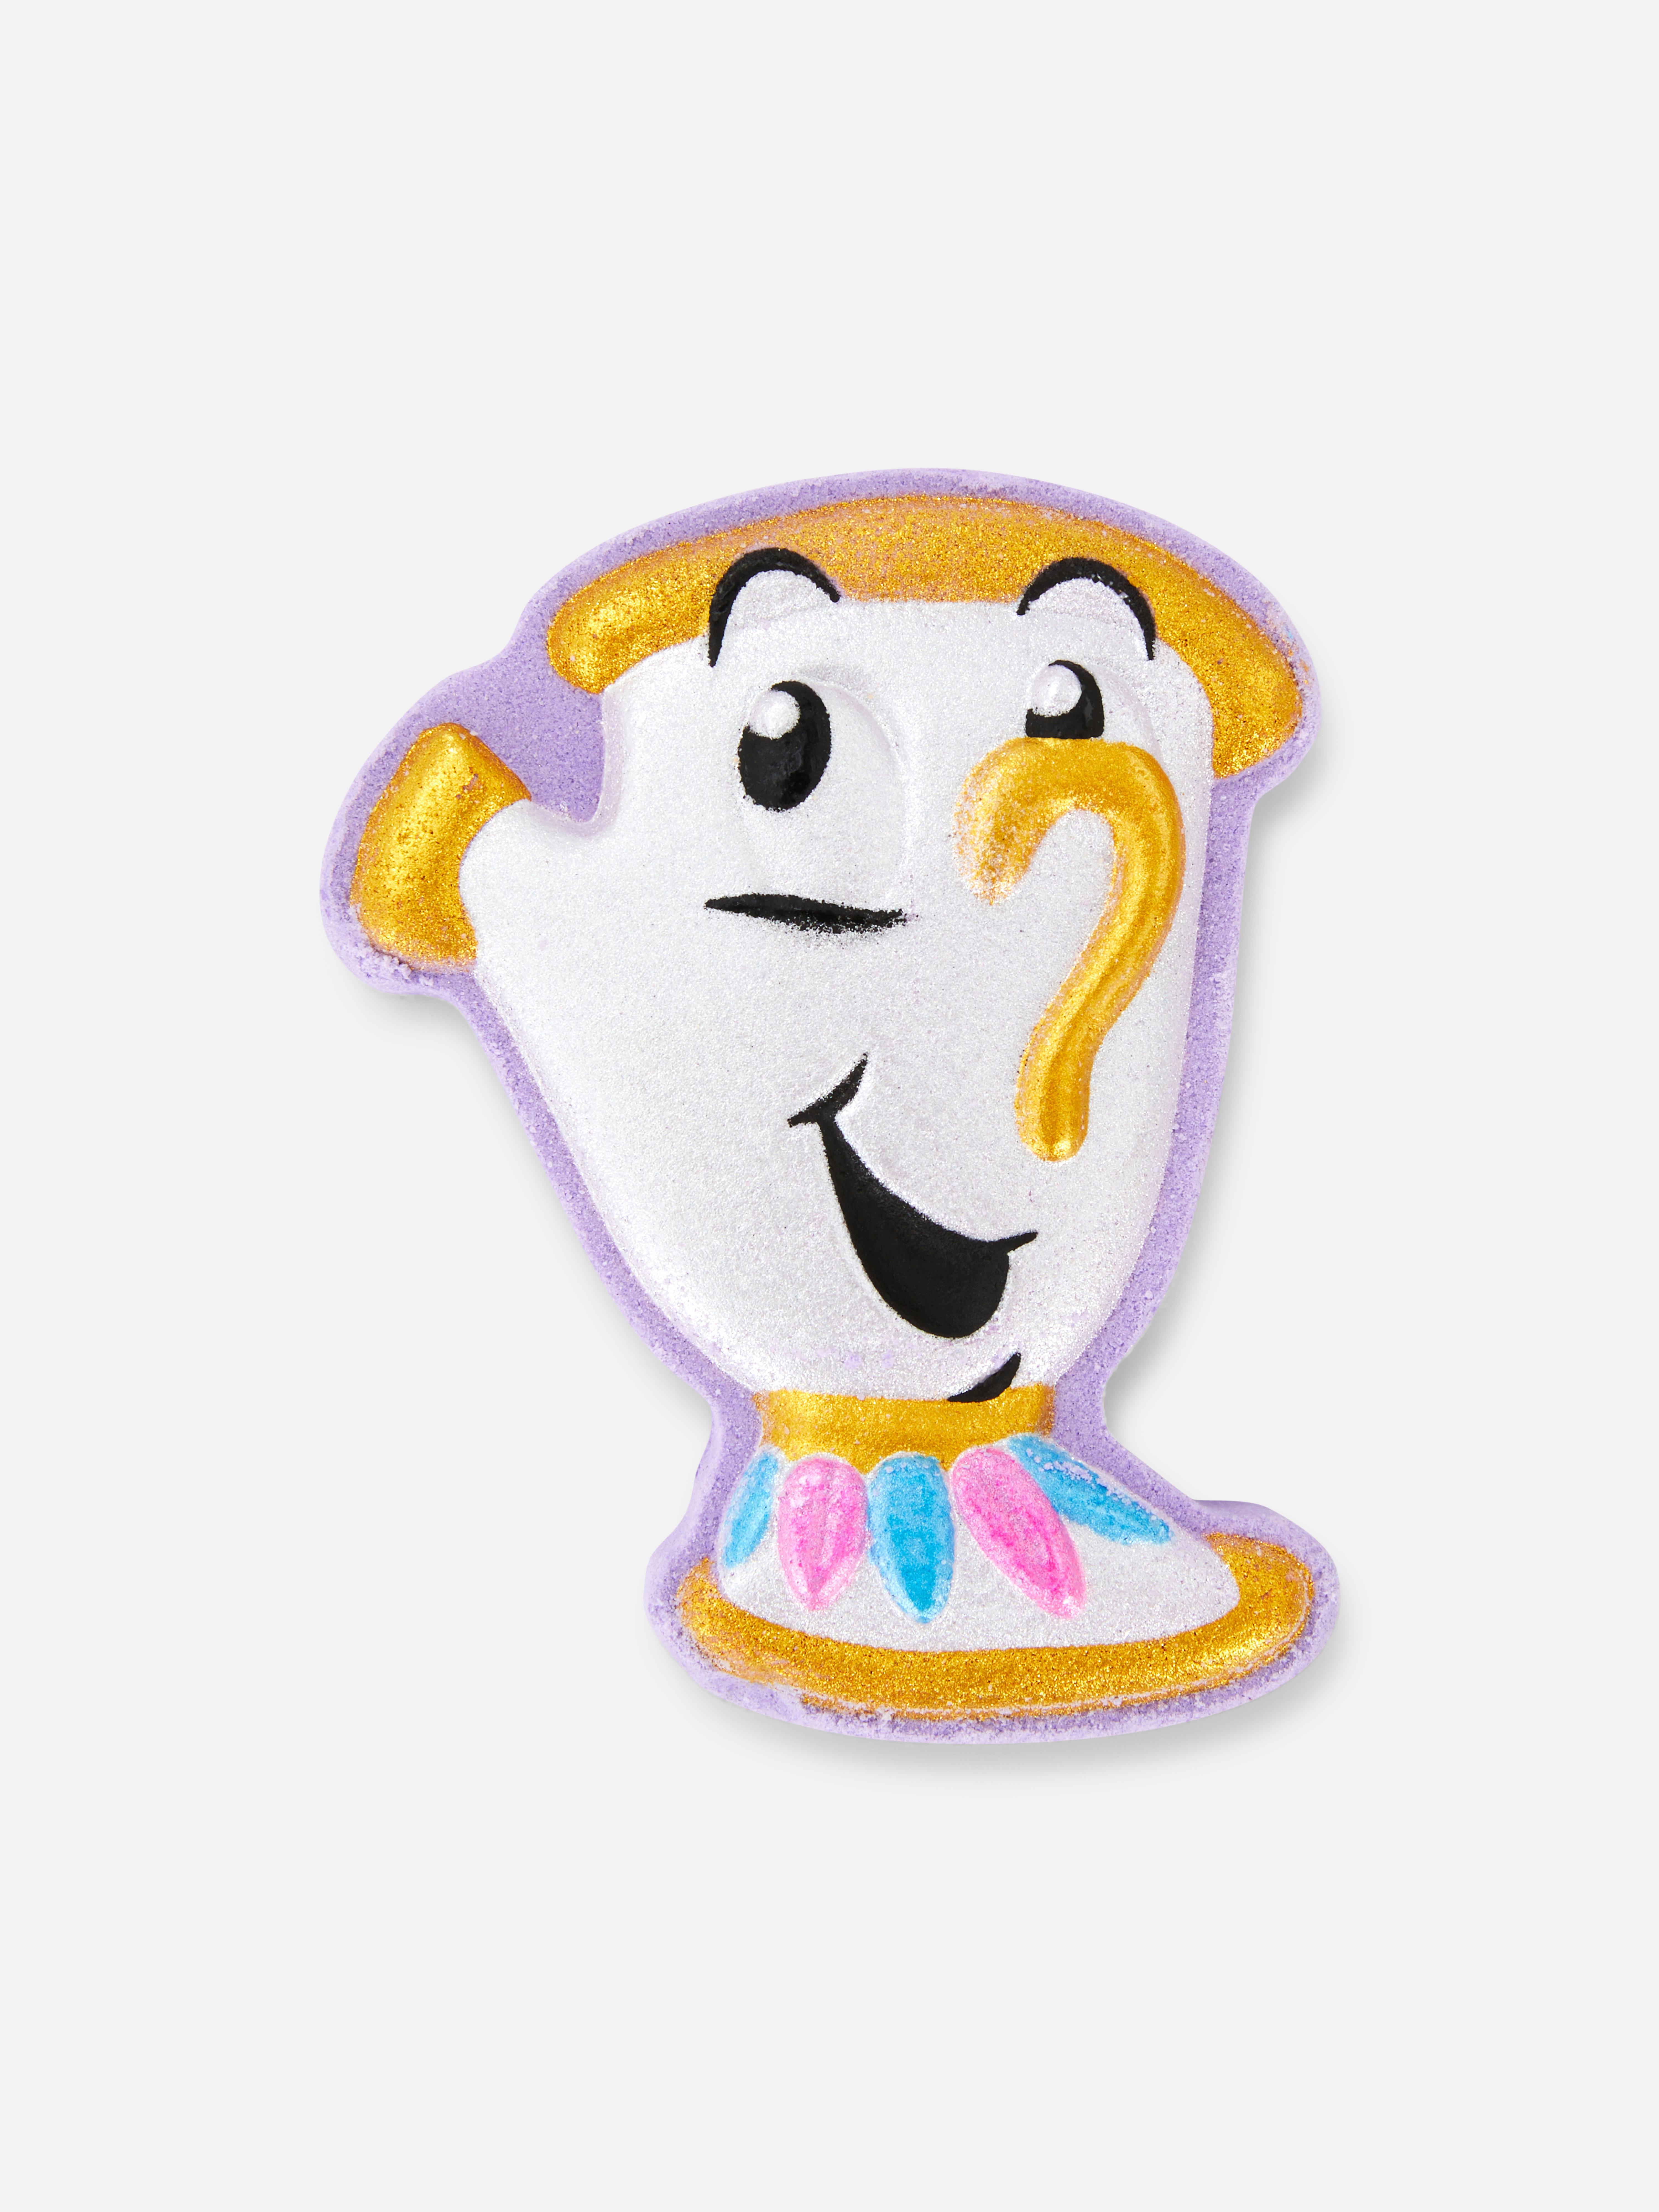 Disney's Beauty And The Beast Chip Bath Fizzer